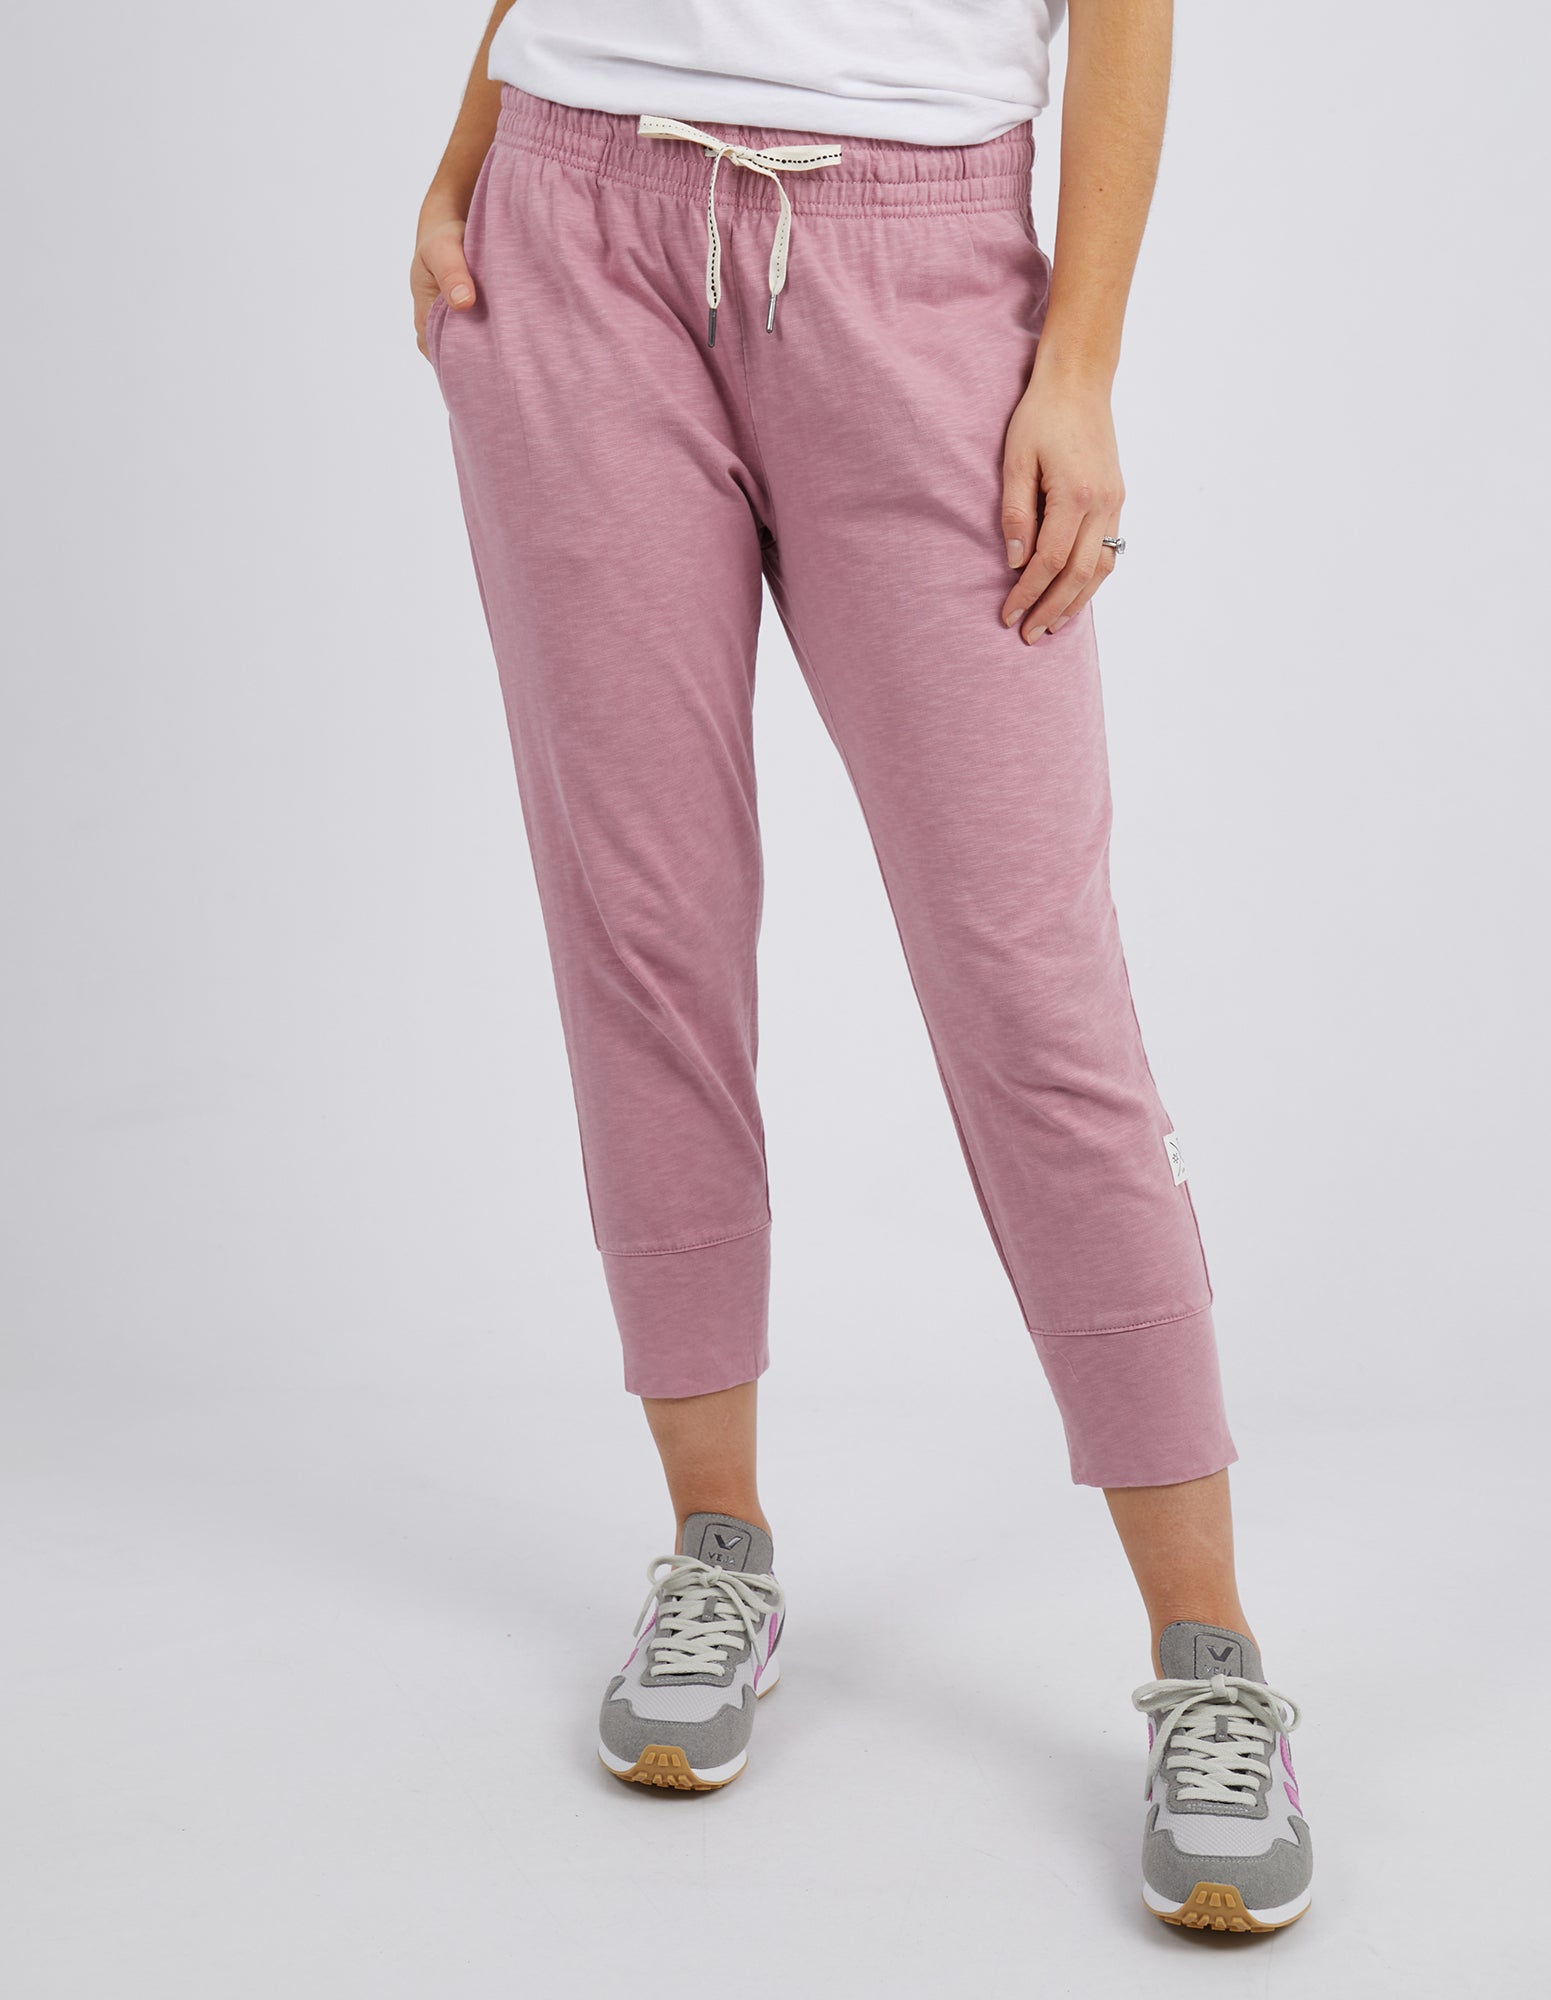 Elm Lifestyle - Fundamental Brunch Pant in Dusty Pink - Womens Clothing -  New arrivals just in cotton lounge wear pants – Secret Girl Stuff